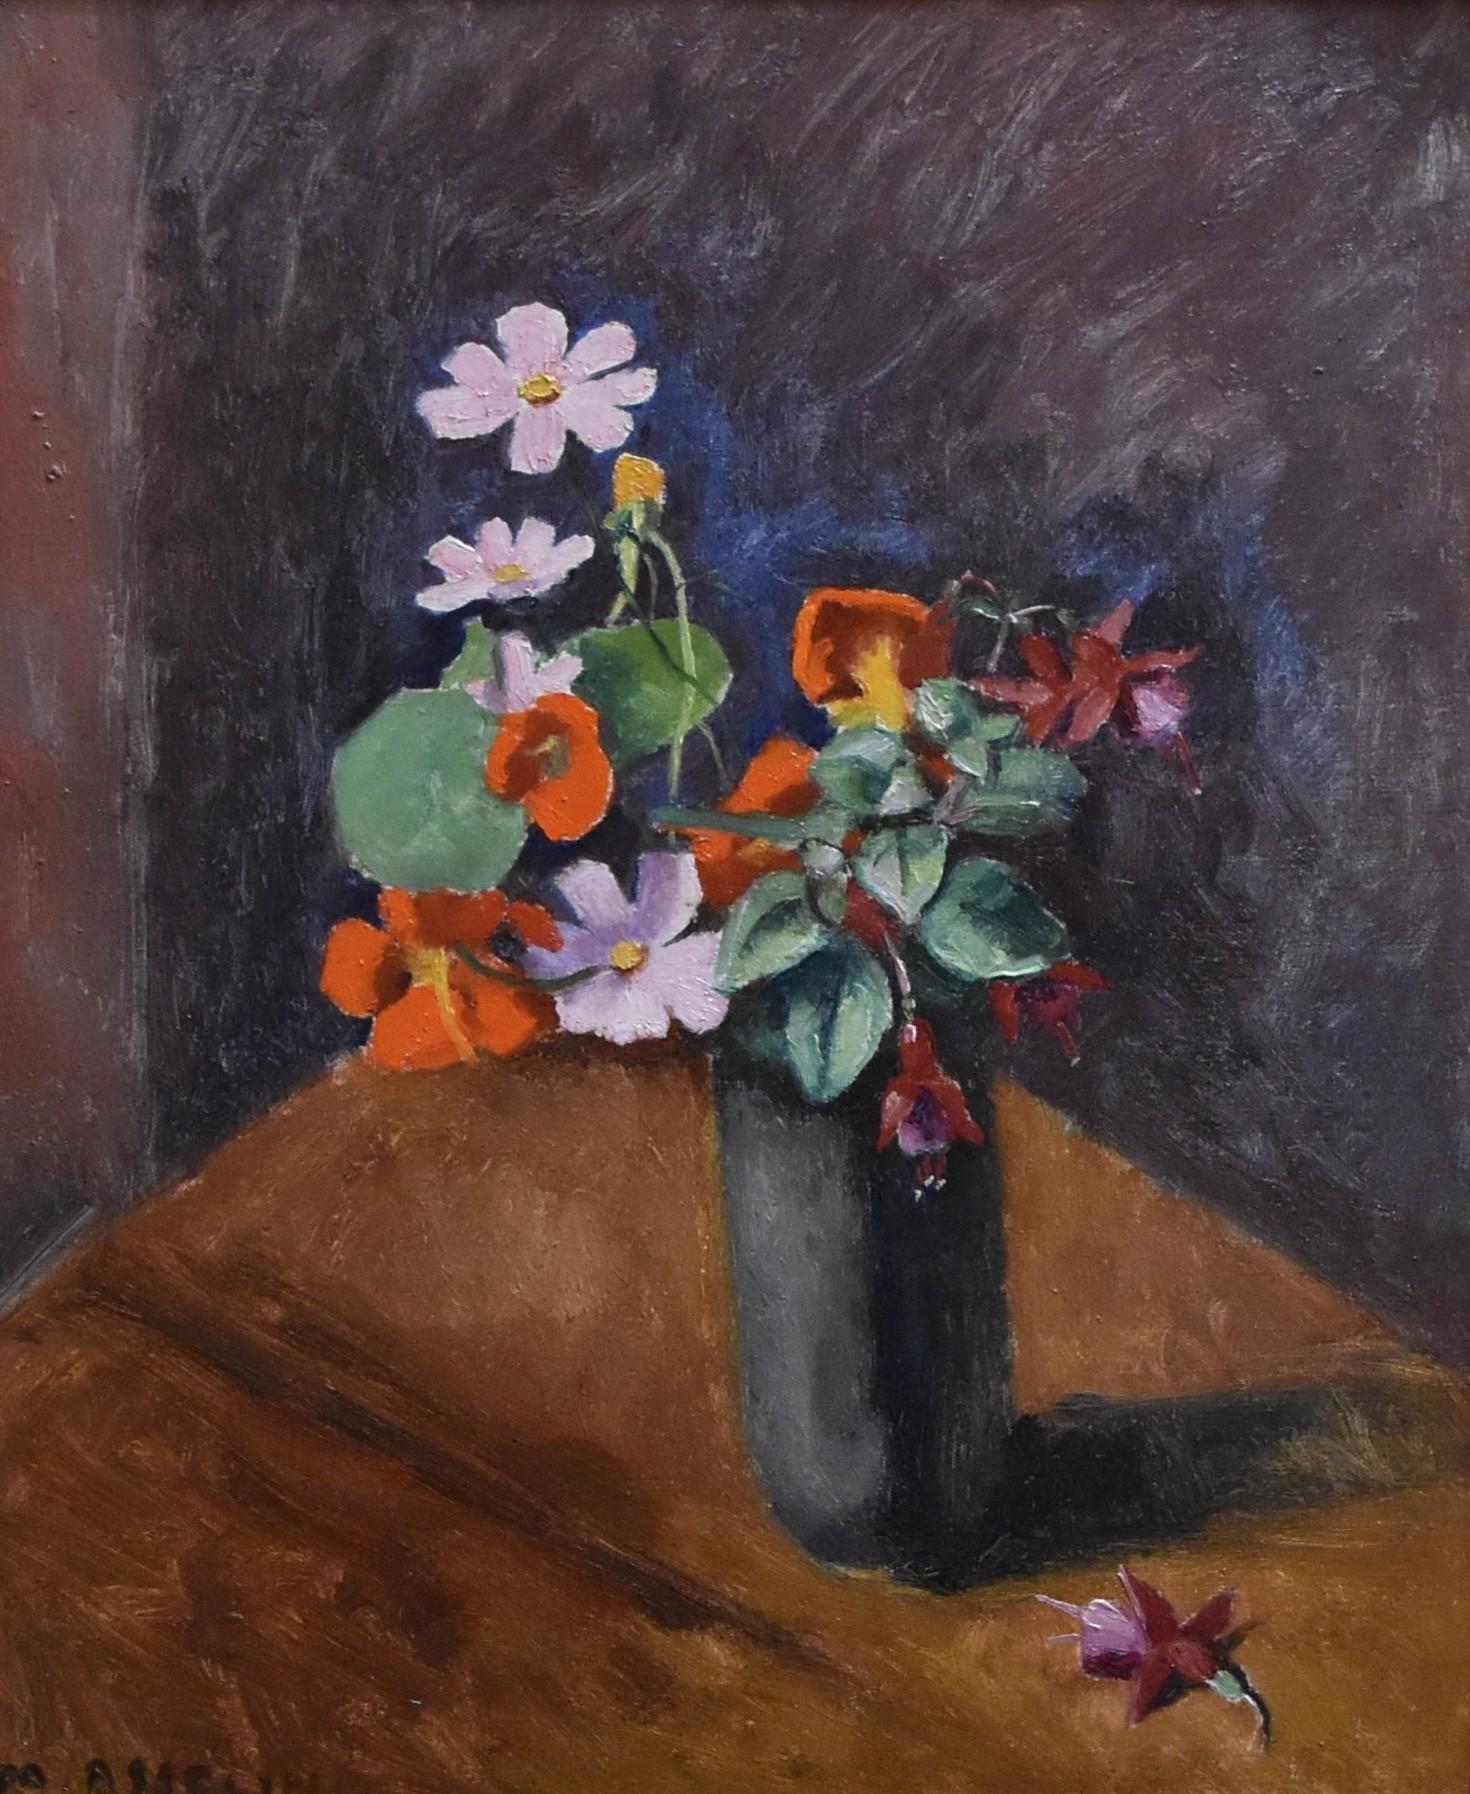 Maurice Asselin (1882-1947) 
A Bunch of flowers in a vase
Signed lower left
Oil on canvas
In good condition
46 x 38 cm
Framed : 52 x 44 cm

Maurice Asselin was born on June 24, 1882 in Orléans. He was a student of Fernand Cormon at the École